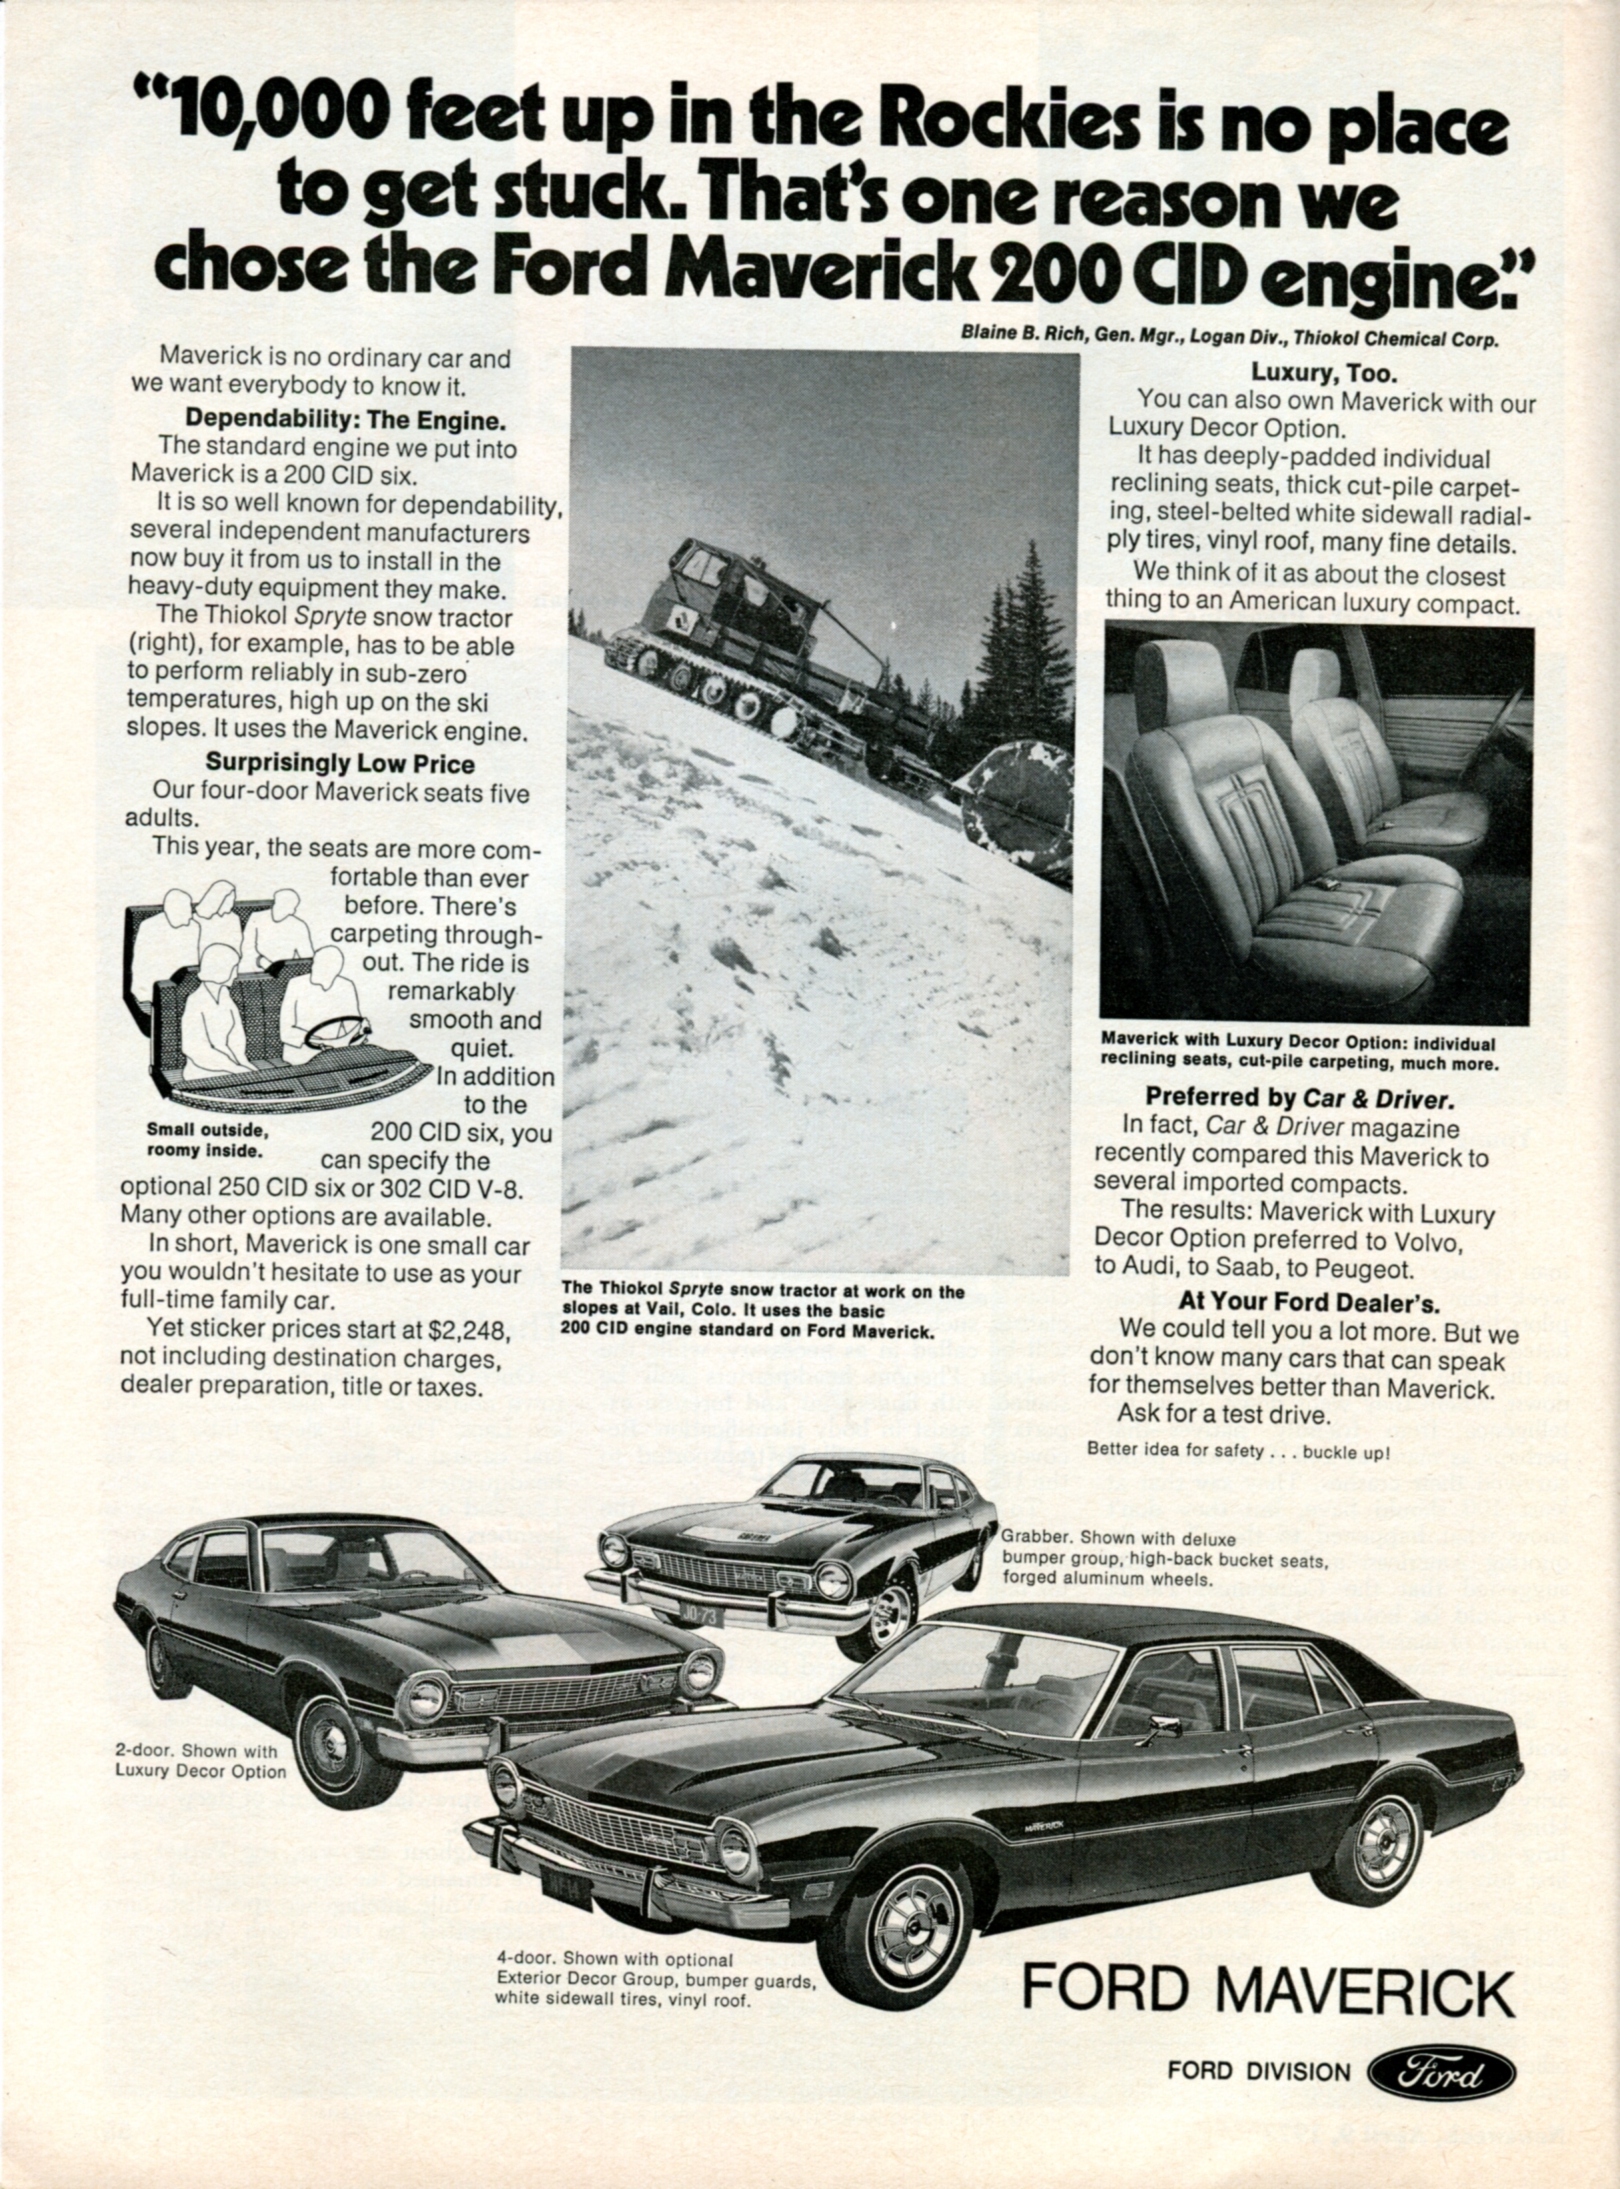 an advertit with pictures of cars, including ford, for the rock cars that would be used on the track